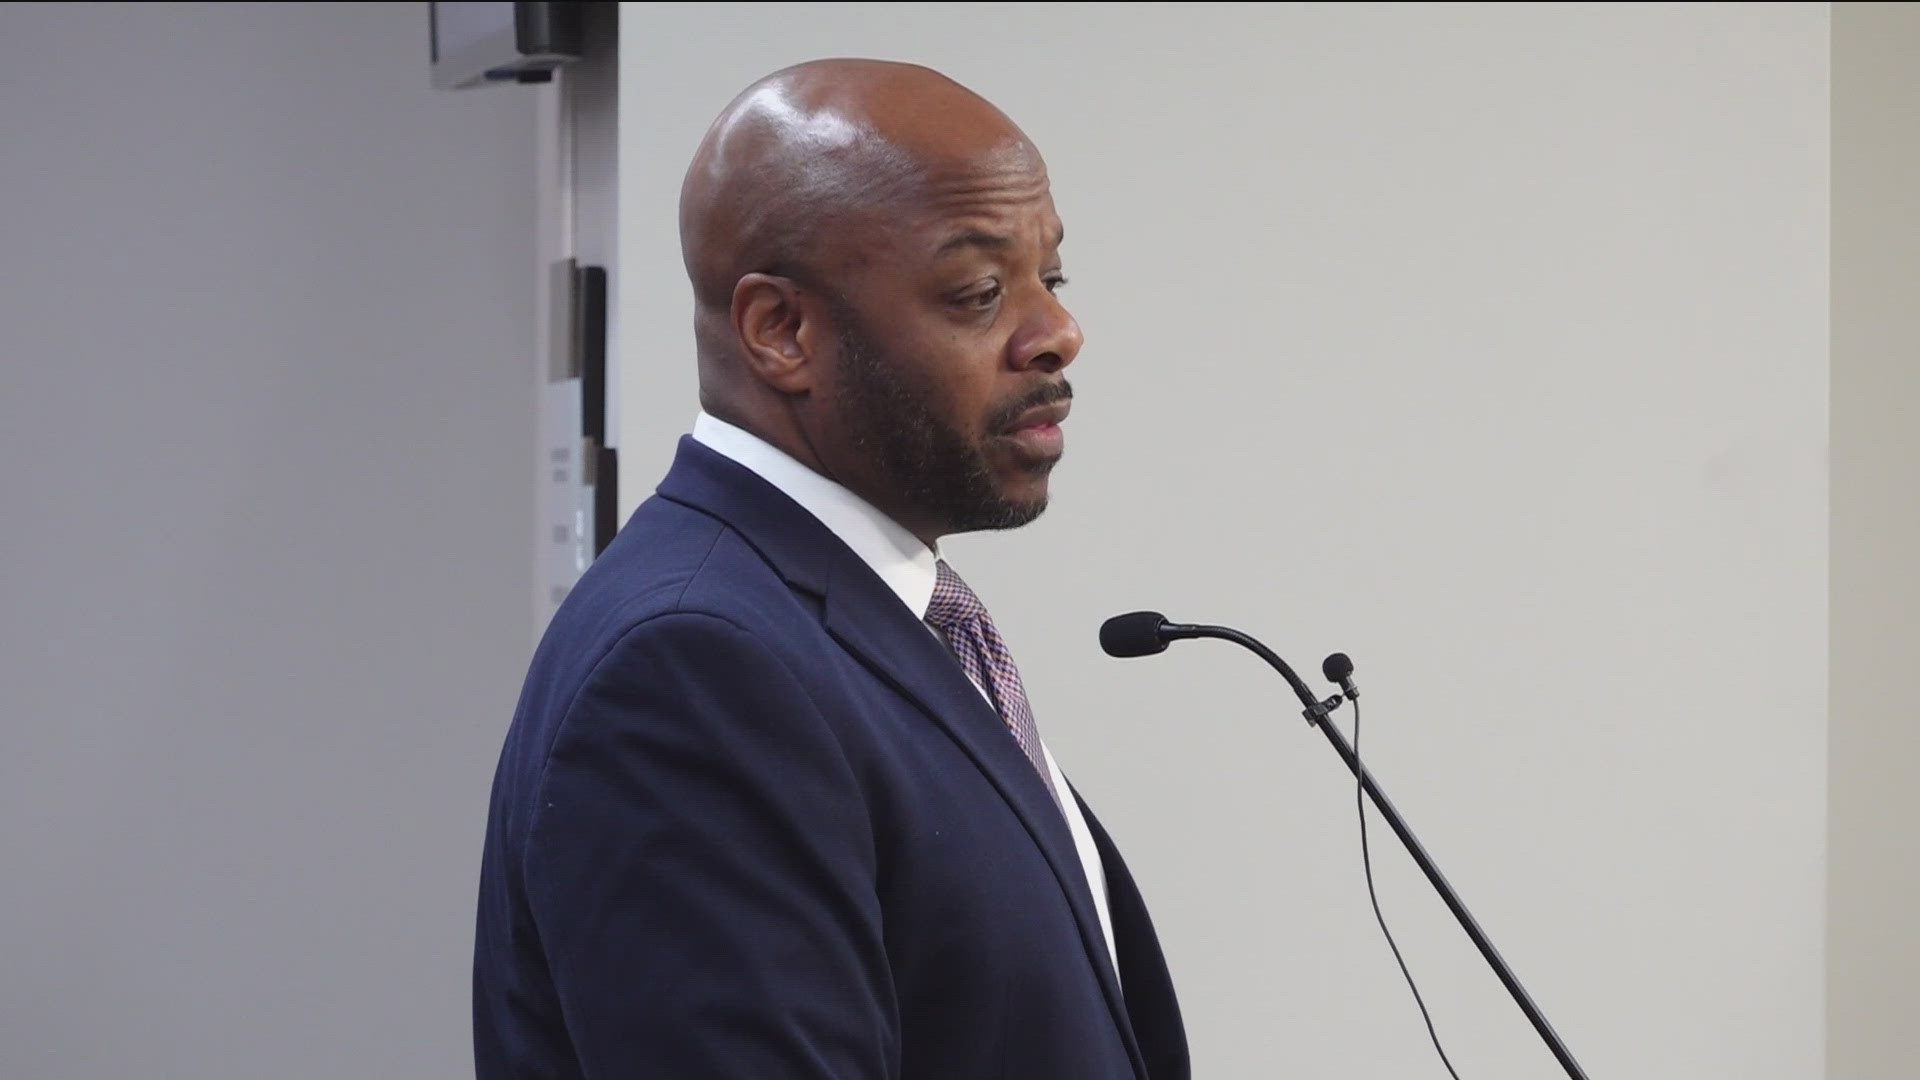 The City Utilities Commission questioned the Atlanta Watershed commissioner at their meeting today. They want to know what went wrong and what changes will be made.